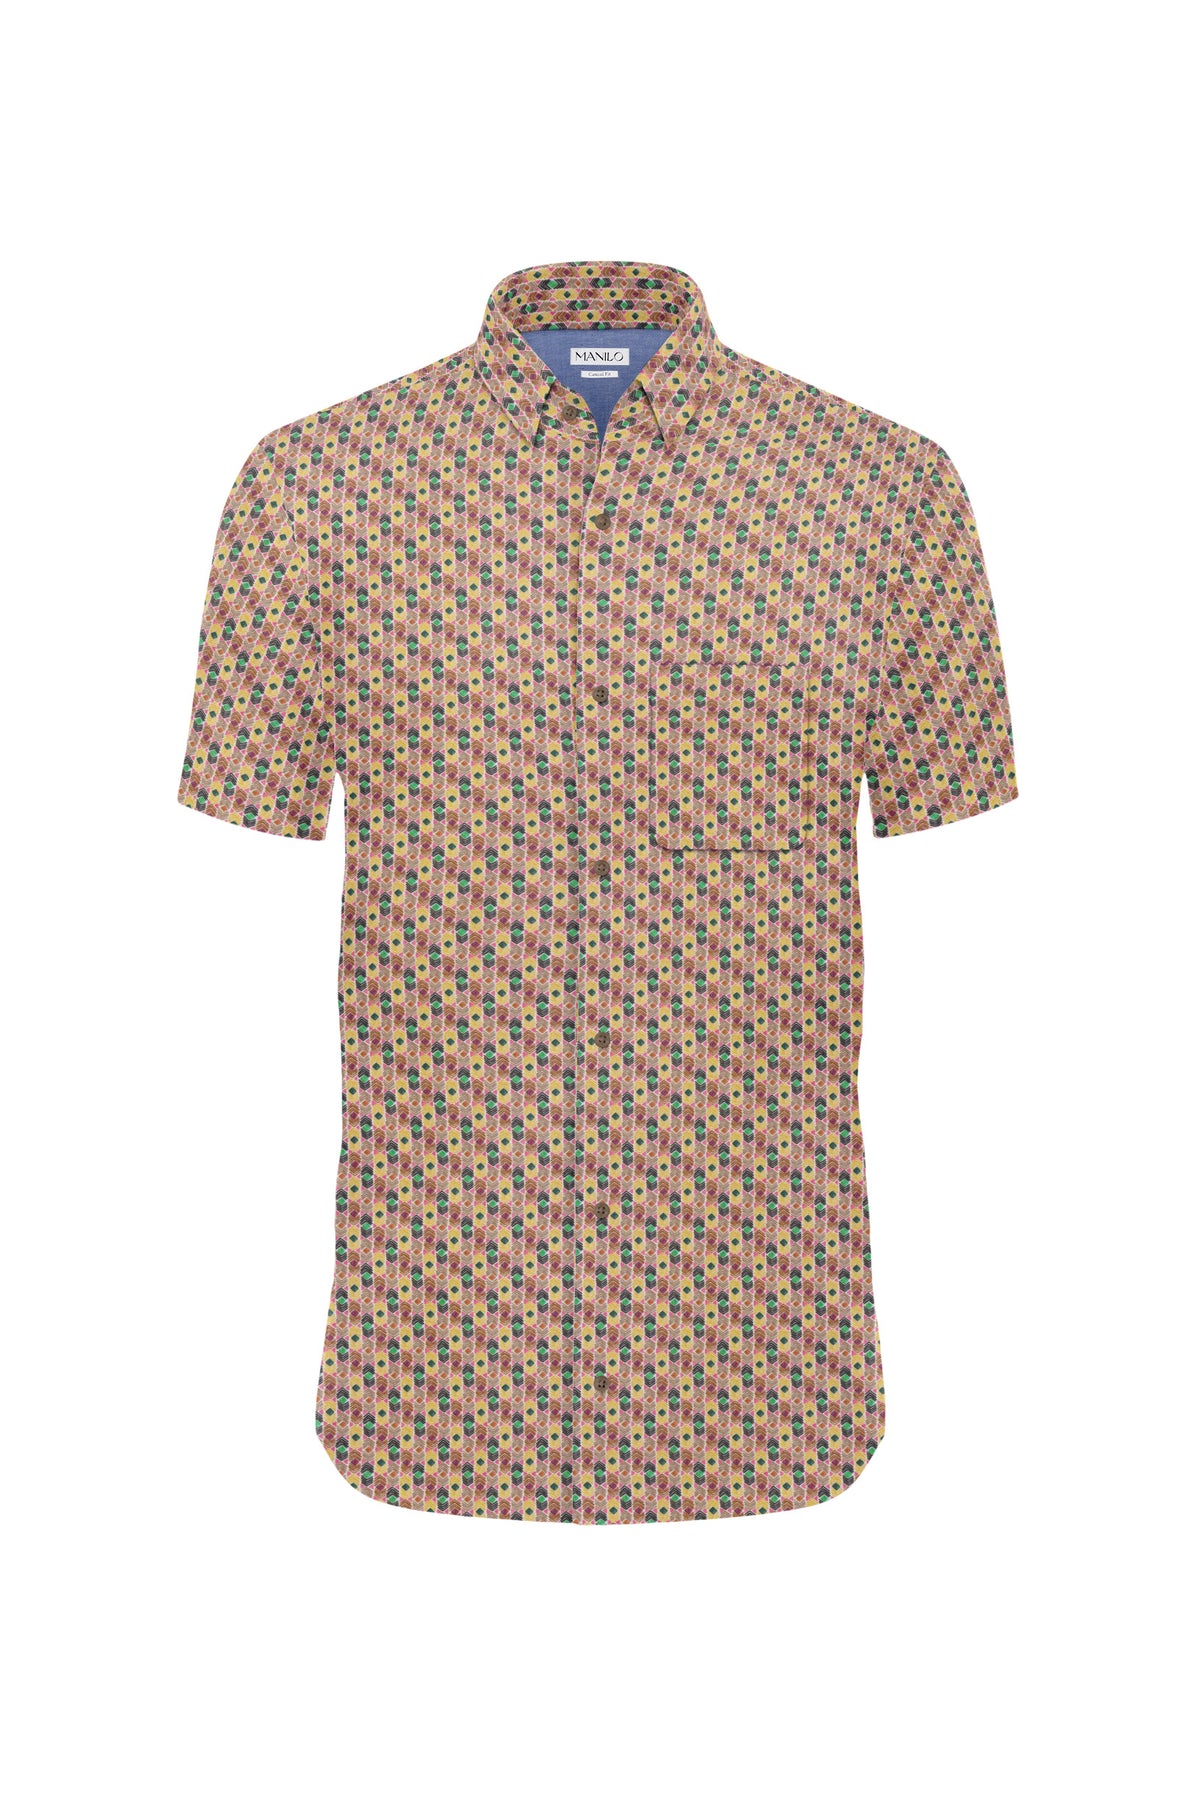 Casual shirt with graphic pattern in multicolor (Art. 2231-C-KA)